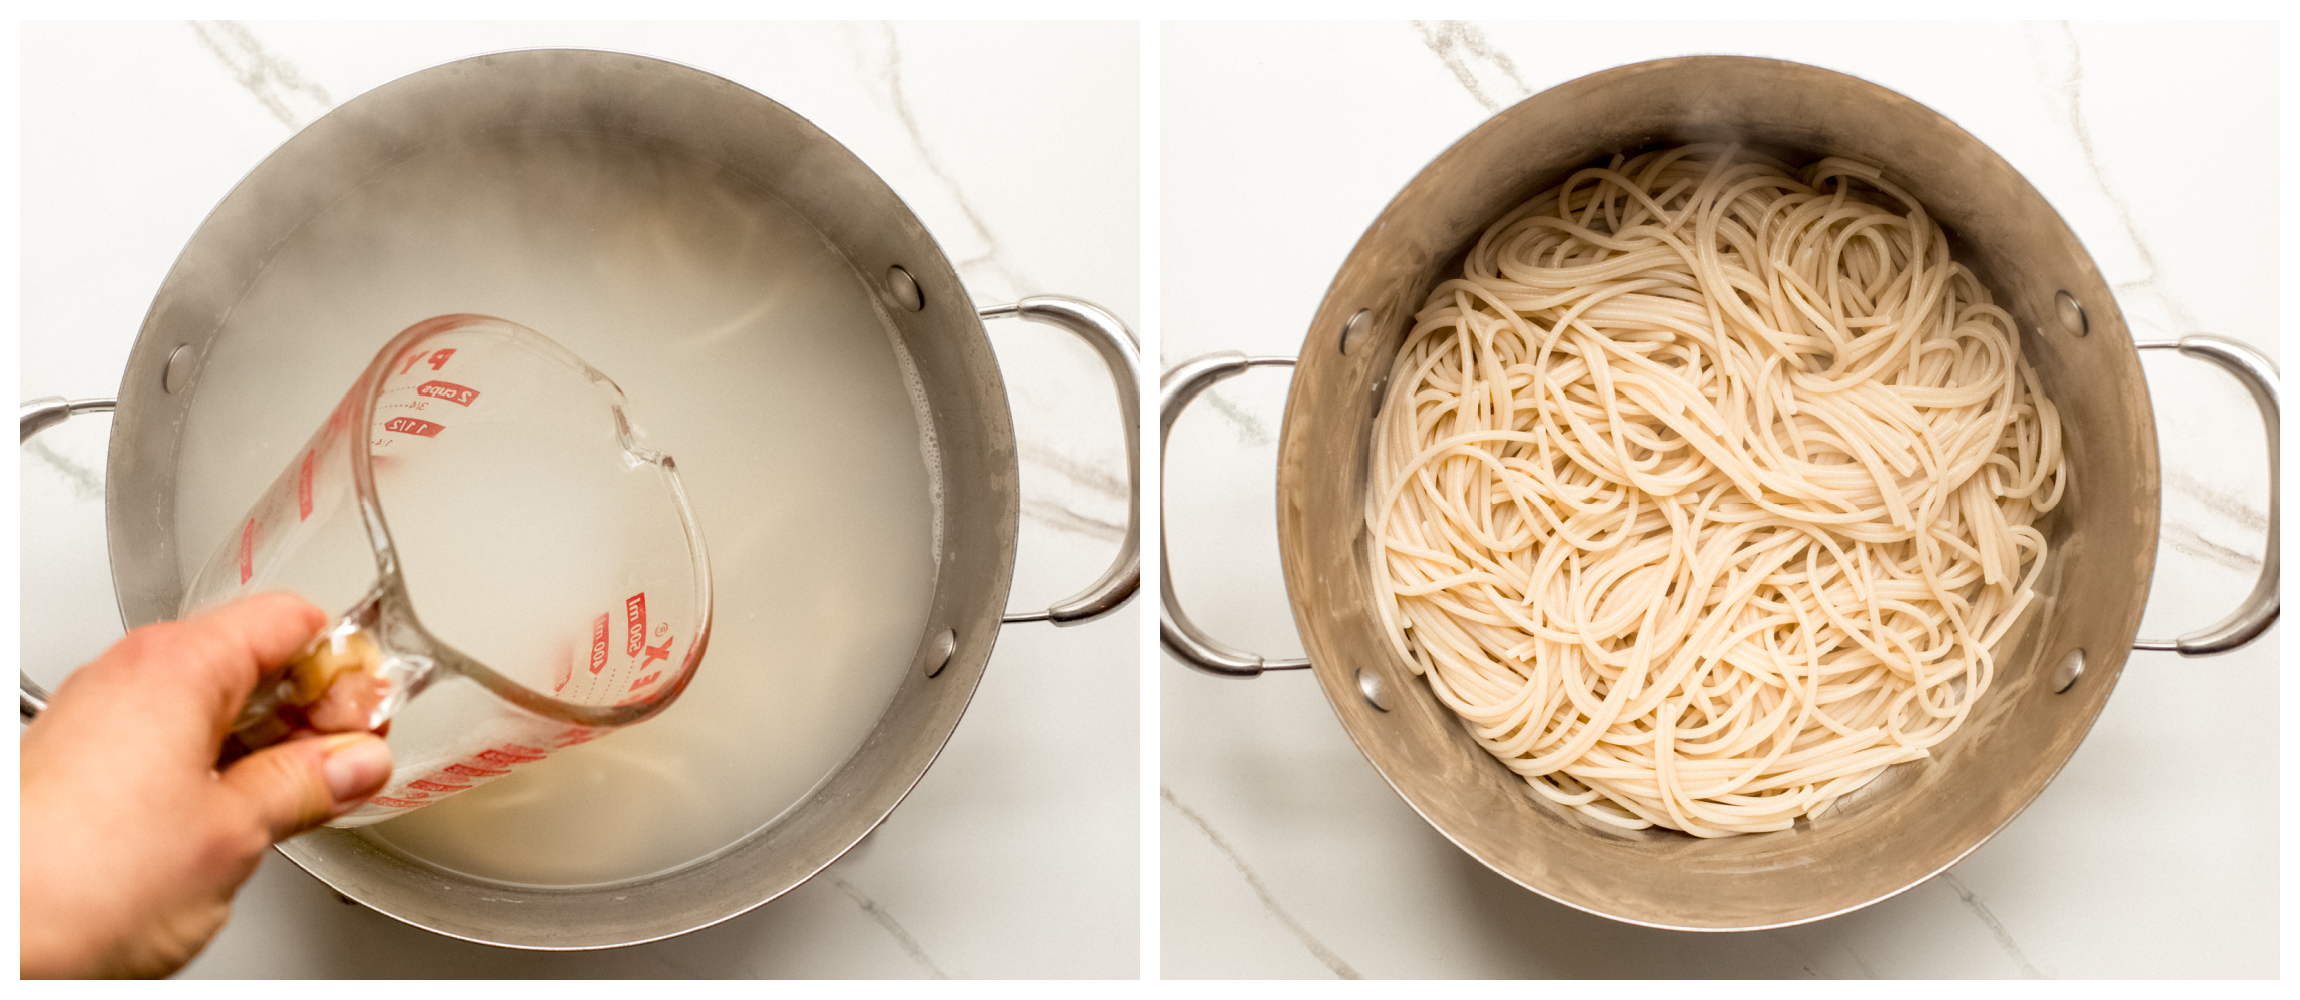 two cooking pot images showing spaghetti in water in one, and drained spaghetti in second.